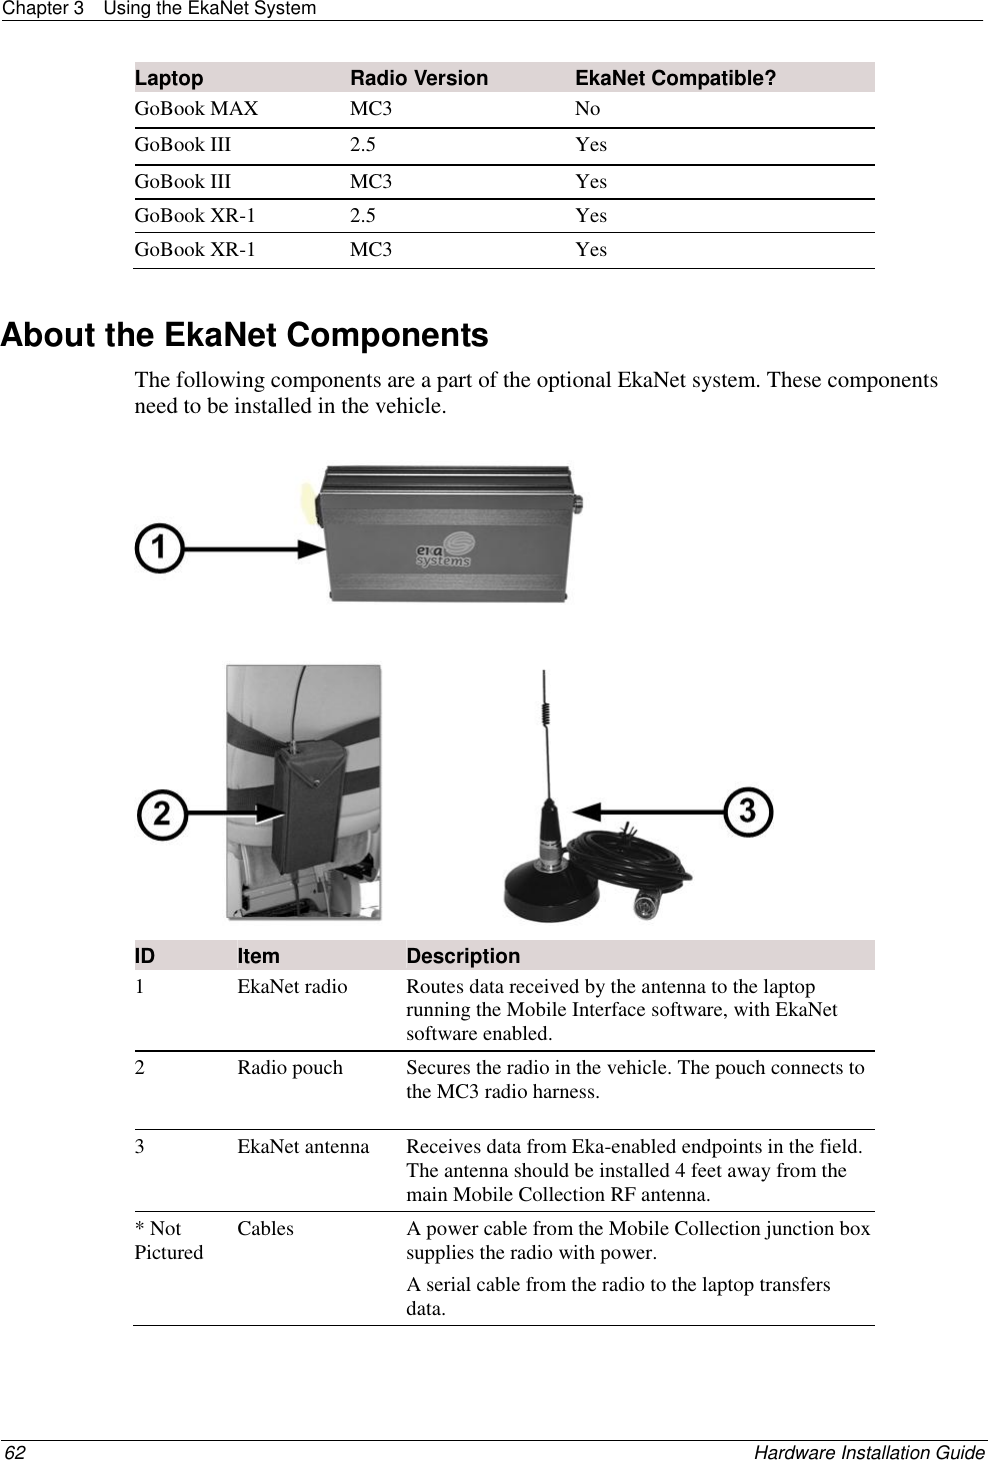 Chapter 3  Using the EkaNet System  62    Hardware Installation Guide  Laptop Radio Version EkaNet Compatible?  GoBook MAX MC3 No GoBook III 2.5 Yes GoBook III MC3 Yes GoBook XR-1 2.5 Yes GoBook XR-1 MC3 Yes   About the EkaNet Components The following components are a part of the optional EkaNet system. These components need to be installed in the vehicle.   ID Item Description 1 EkaNet radio  Routes data received by the antenna to the laptop running the Mobile Interface software, with EkaNet software enabled.   2 Radio pouch Secures the radio in the vehicle. The pouch connects to the MC3 radio harness.   3 EkaNet antenna Receives data from Eka-enabled endpoints in the field. The antenna should be installed 4 feet away from the main Mobile Collection RF antenna.  * Not Pictured Cables A power cable from the Mobile Collection junction box supplies the radio with power.  A serial cable from the radio to the laptop transfers data.   